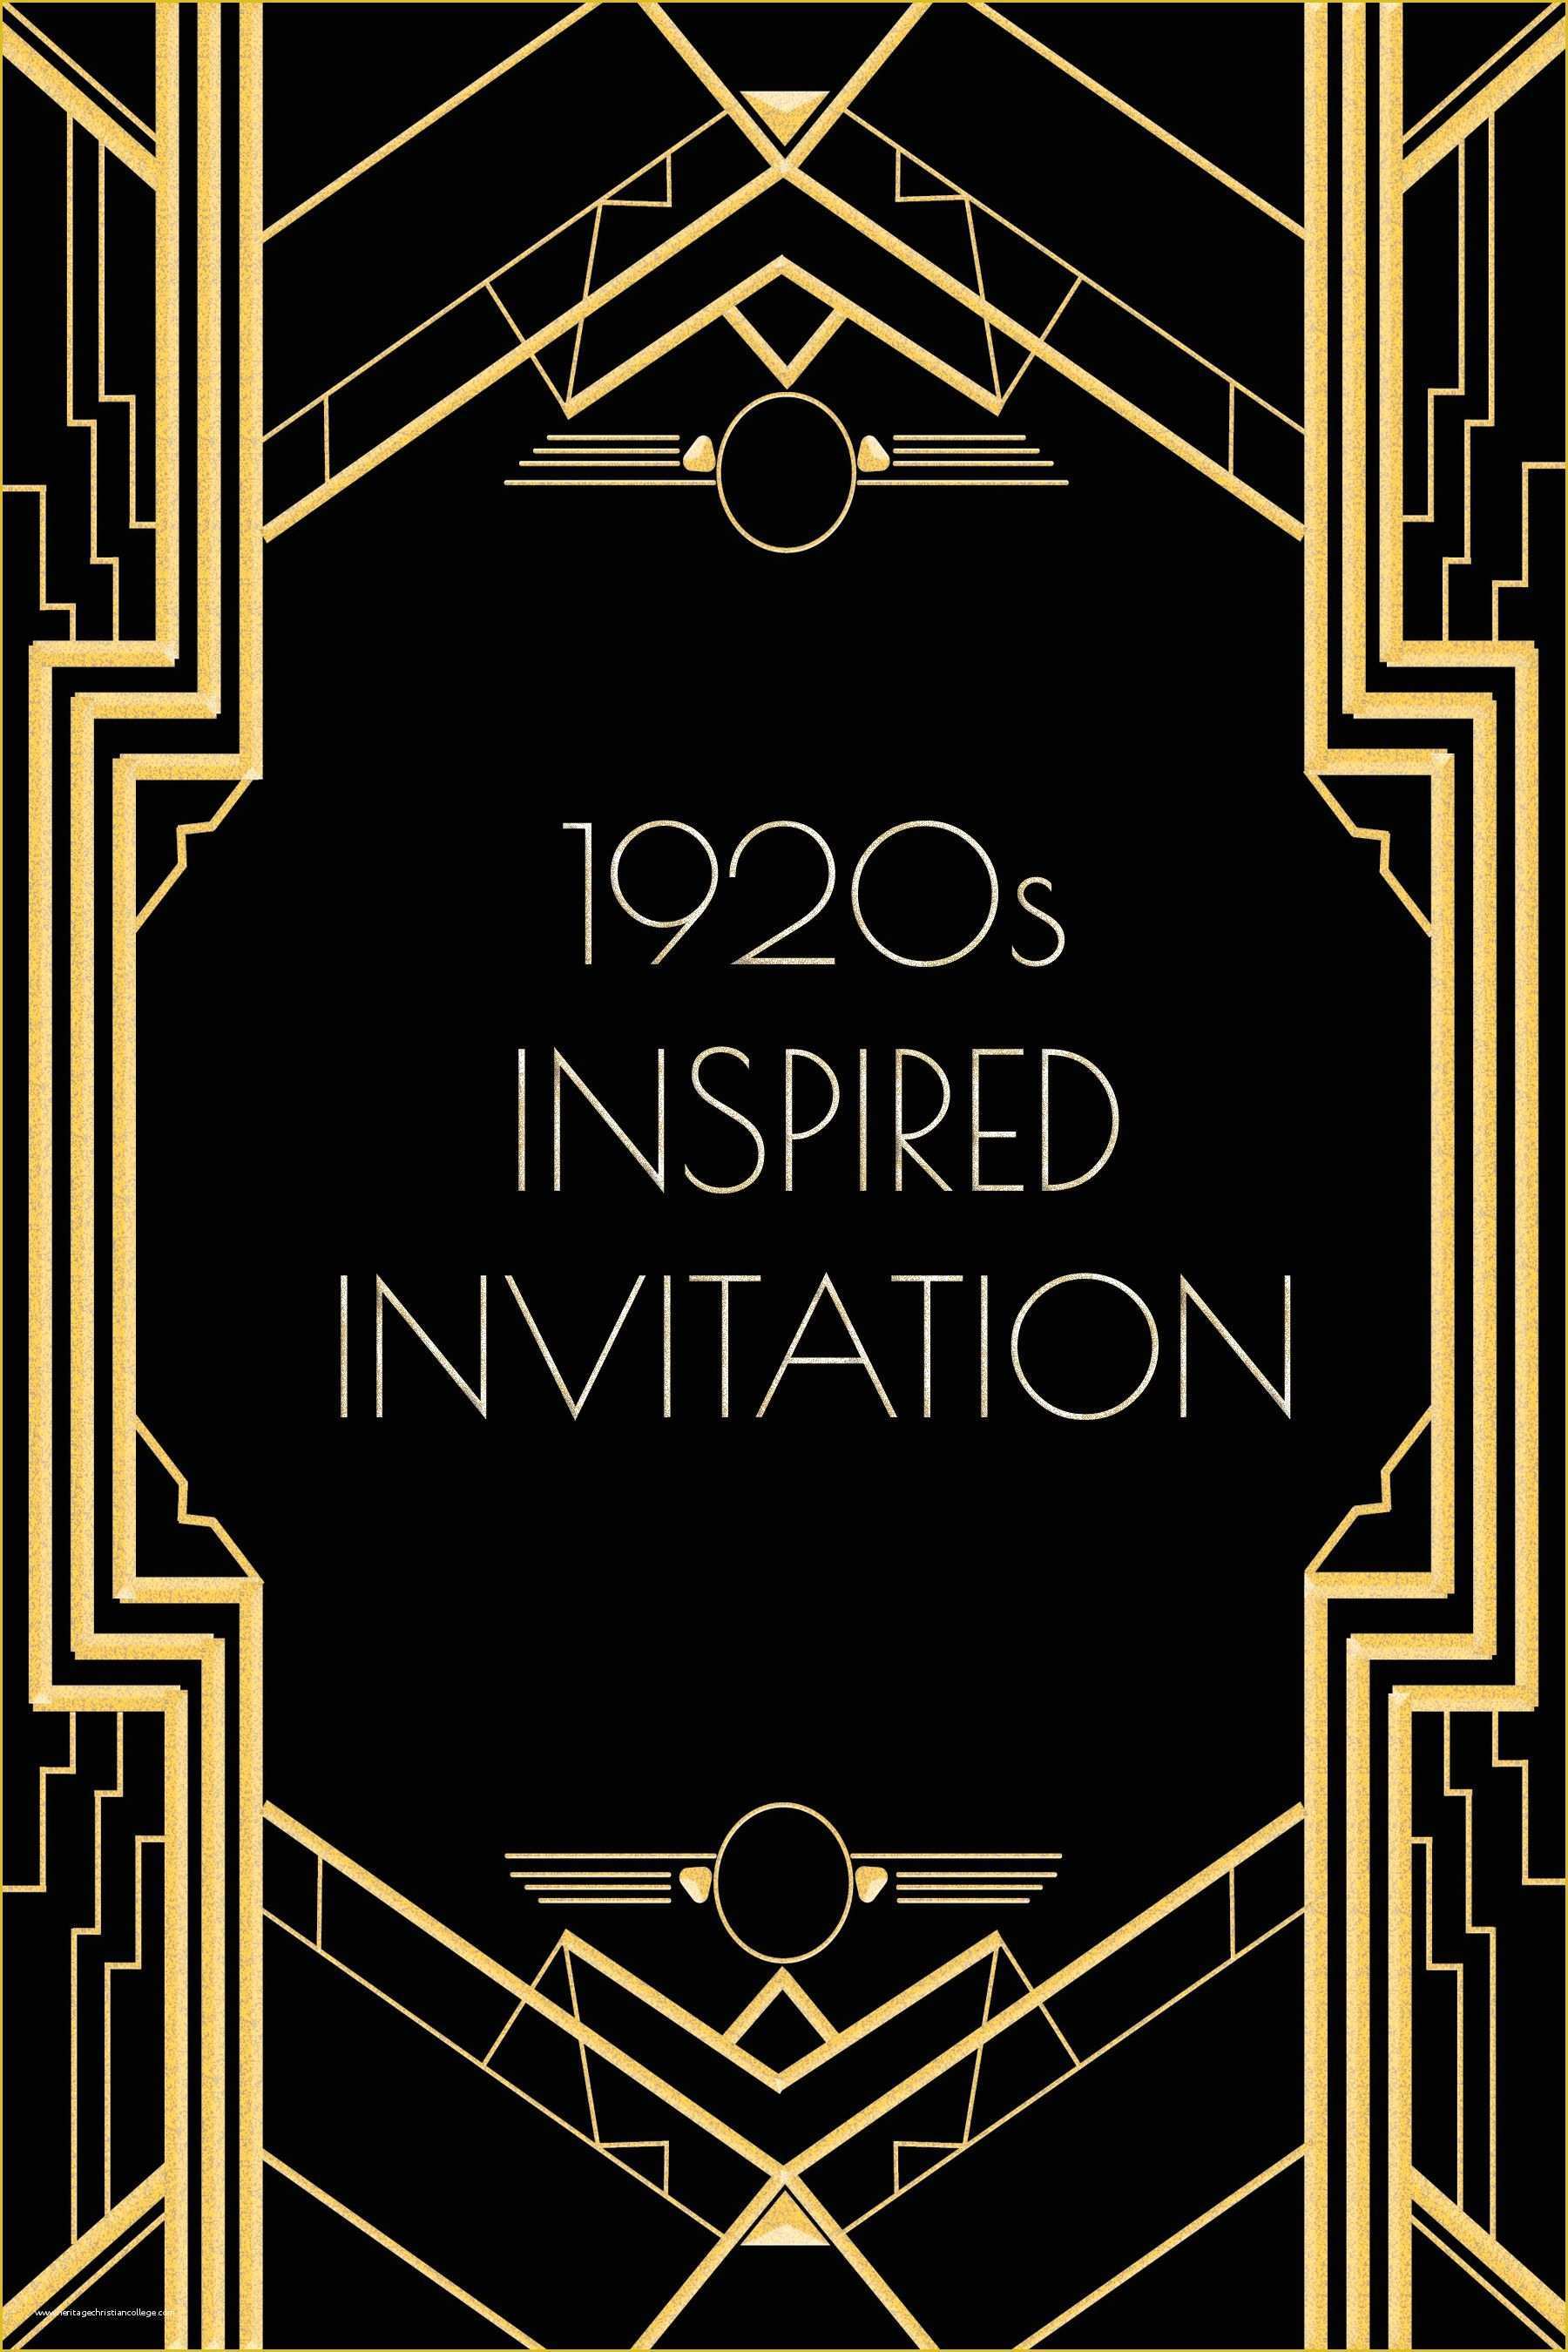 Great Gatsby themed Invitation Template Free Of Use This 1920s Inspired Invitation Template for A Gatsby